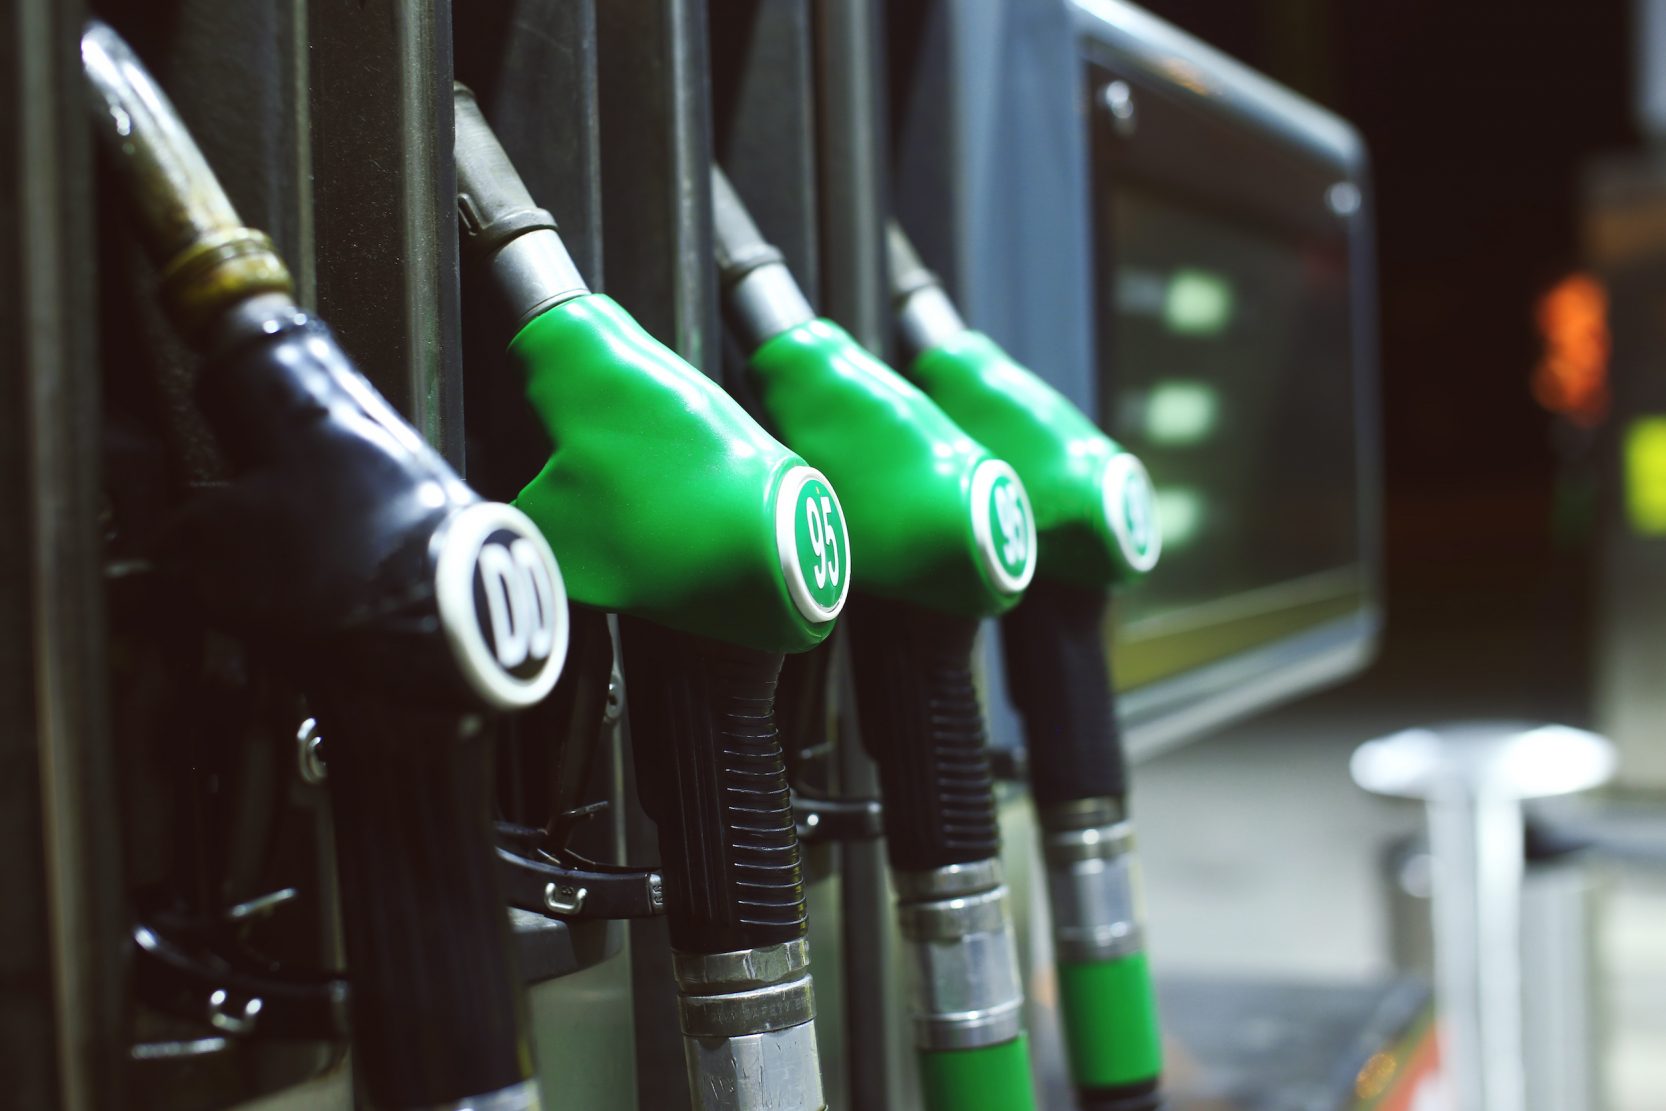 QatarEnergy Announces Fuel Prices for March